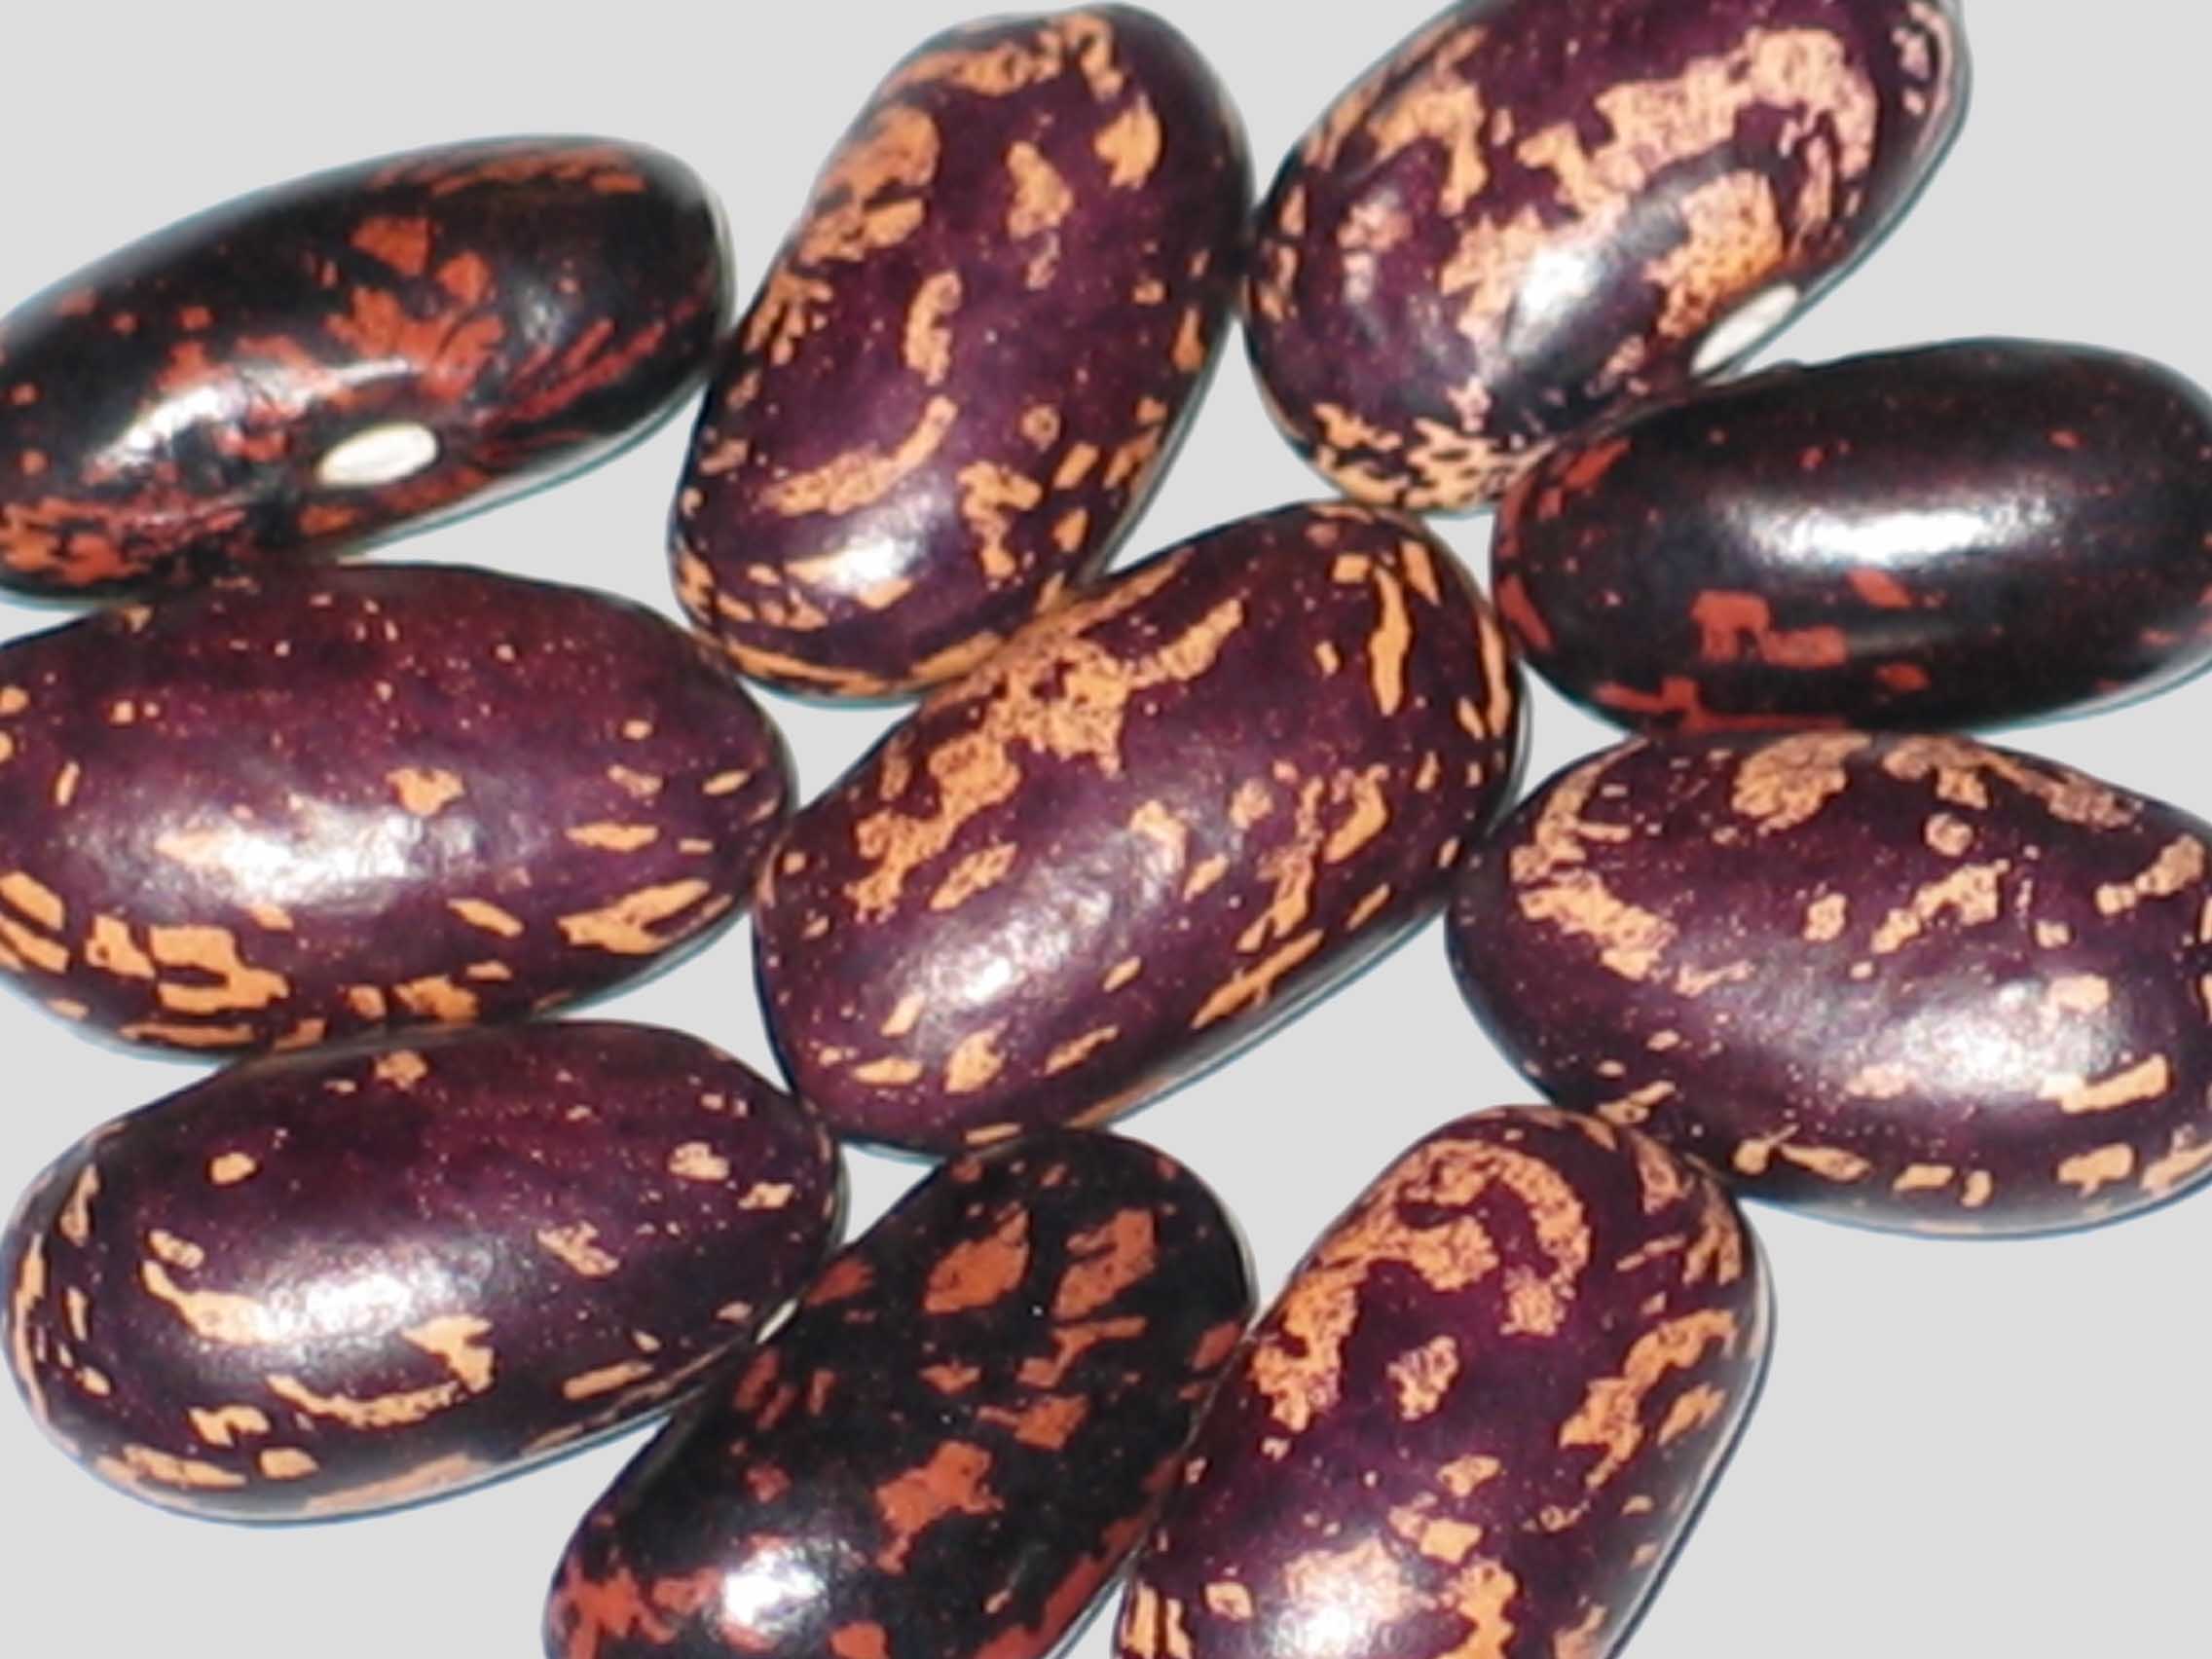 image of Syrian Fire beans